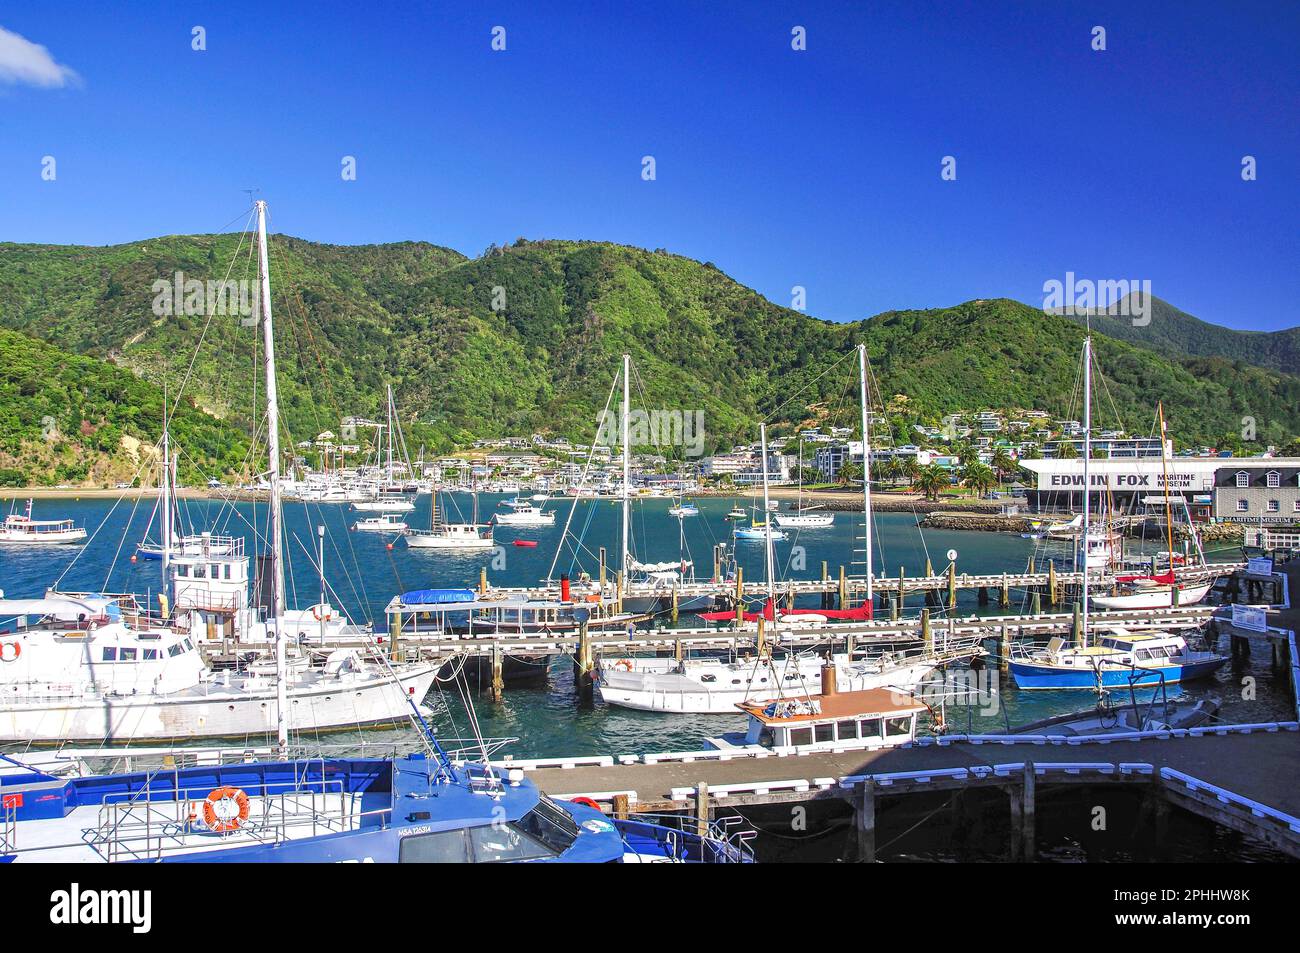 View of town and harbour, Picton, Queen Charlotte Sound, Marlborough Sounds, Marlborough Region, South Island, New Zealand Stock Photo